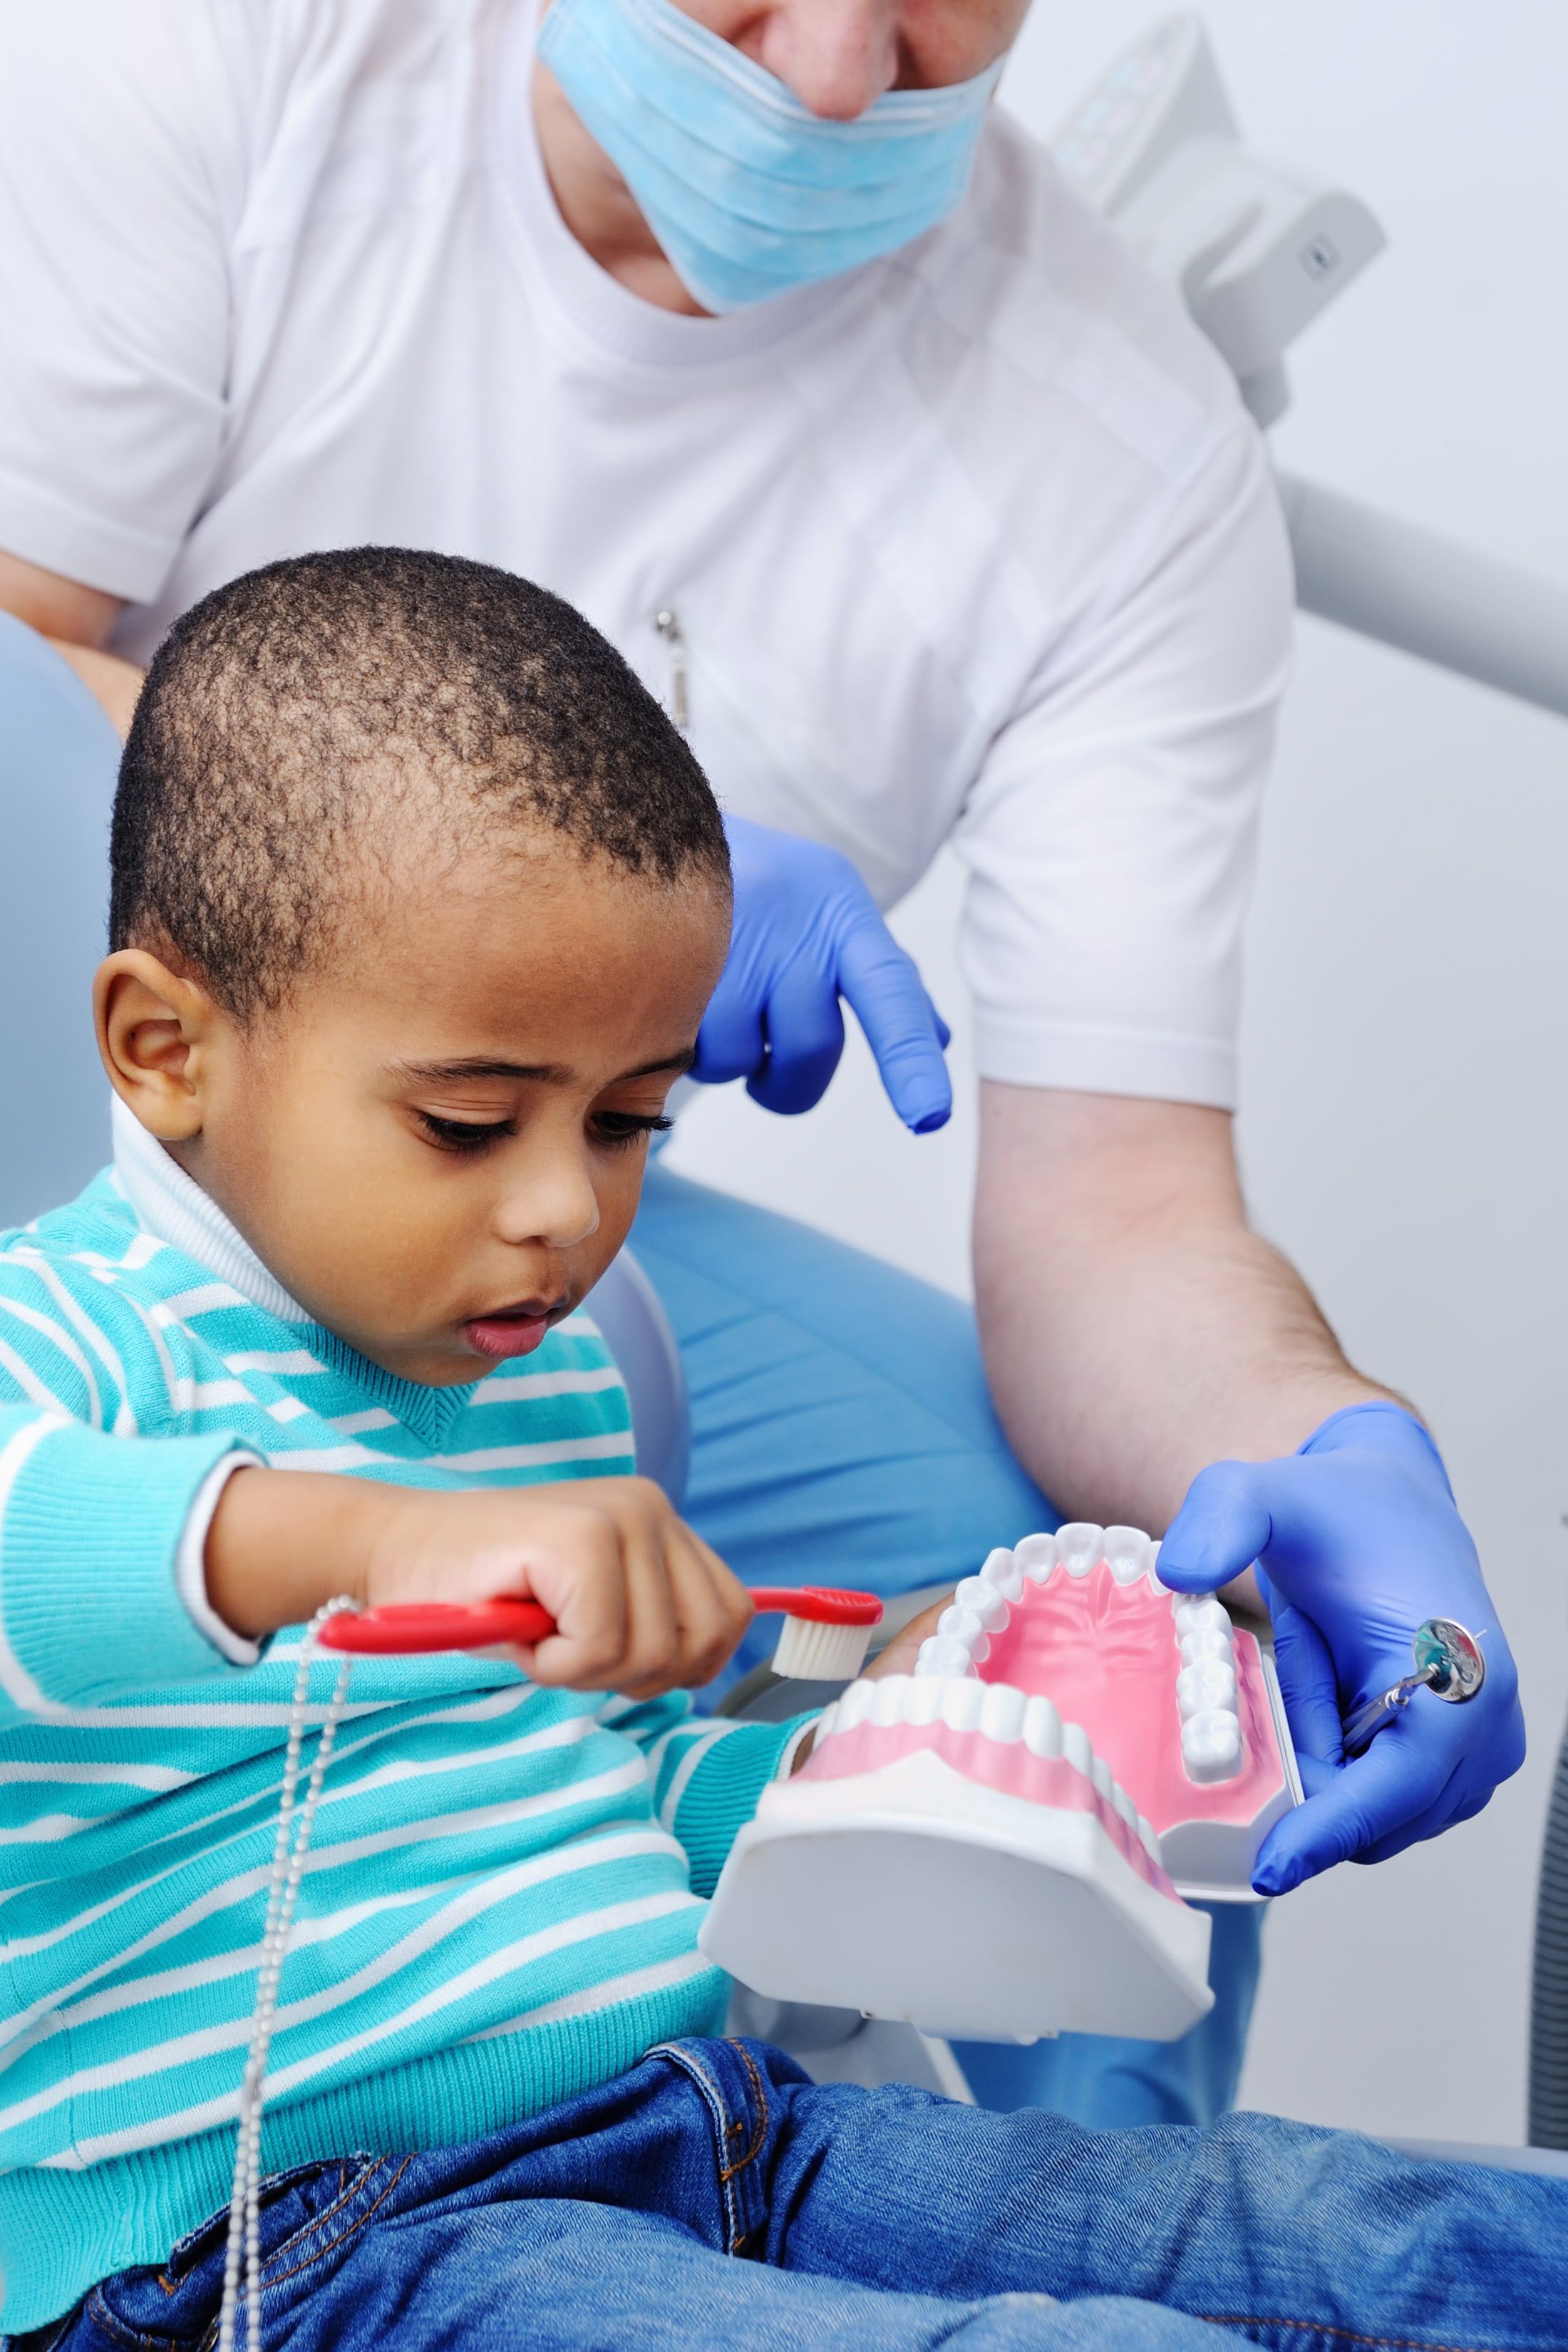 Pediatric dentist shows young child how to brush their teeth on an enlarged tooth model